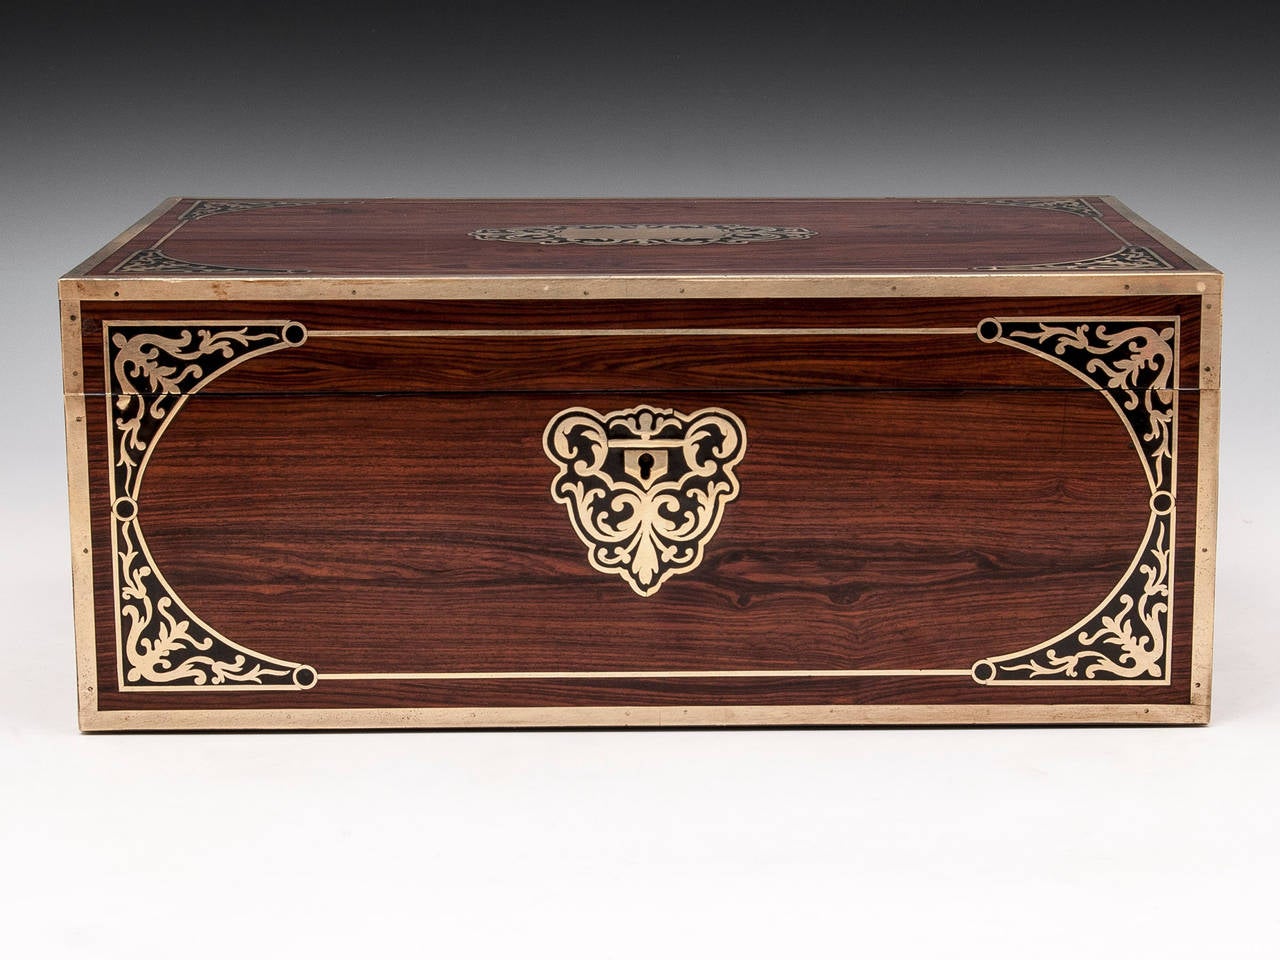 Striking Kingwood writing box by David Edwards with decorative brass inlays, ornate escutcheons, brass carrying handles, gilded candle sconces and a secret compartment containing two hidden drawers. 

The interior features a replacement dark olive